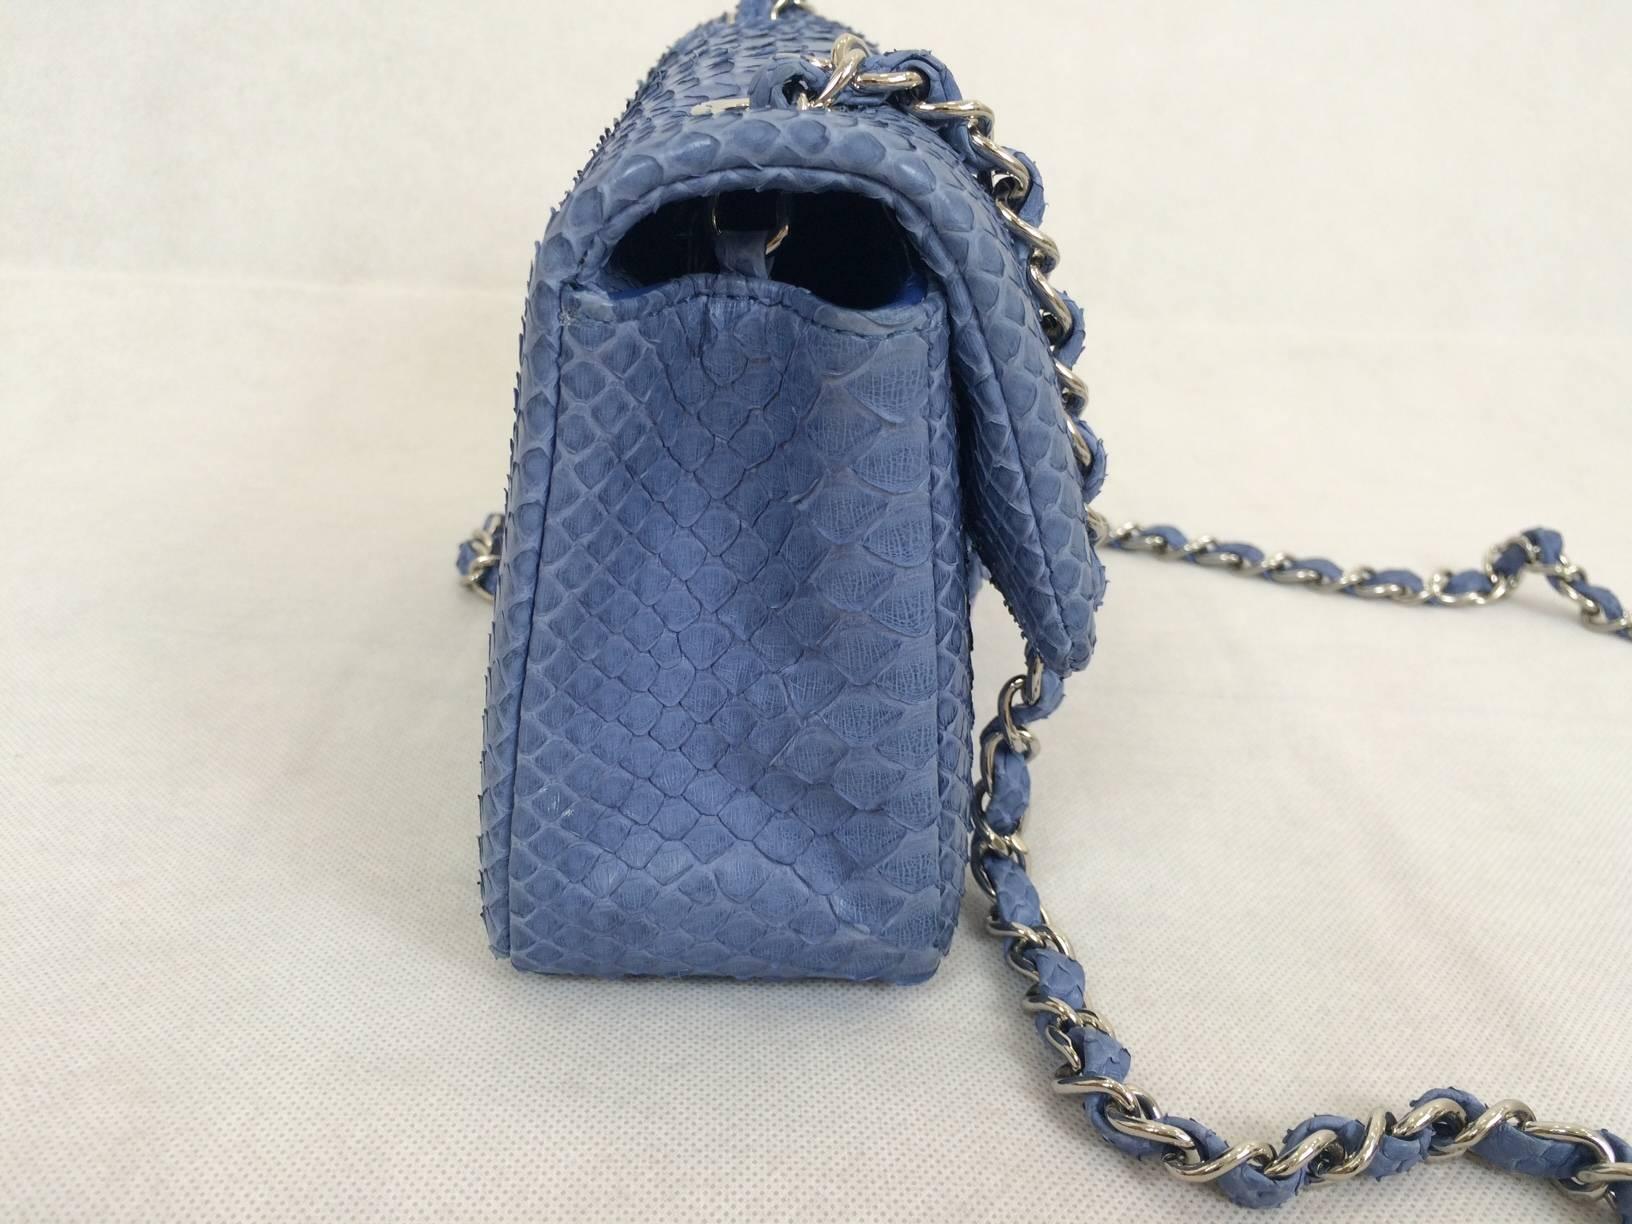 Chanel Mini Powder Blue Python Crossbody Bag In New Condition For Sale In Castries, FR